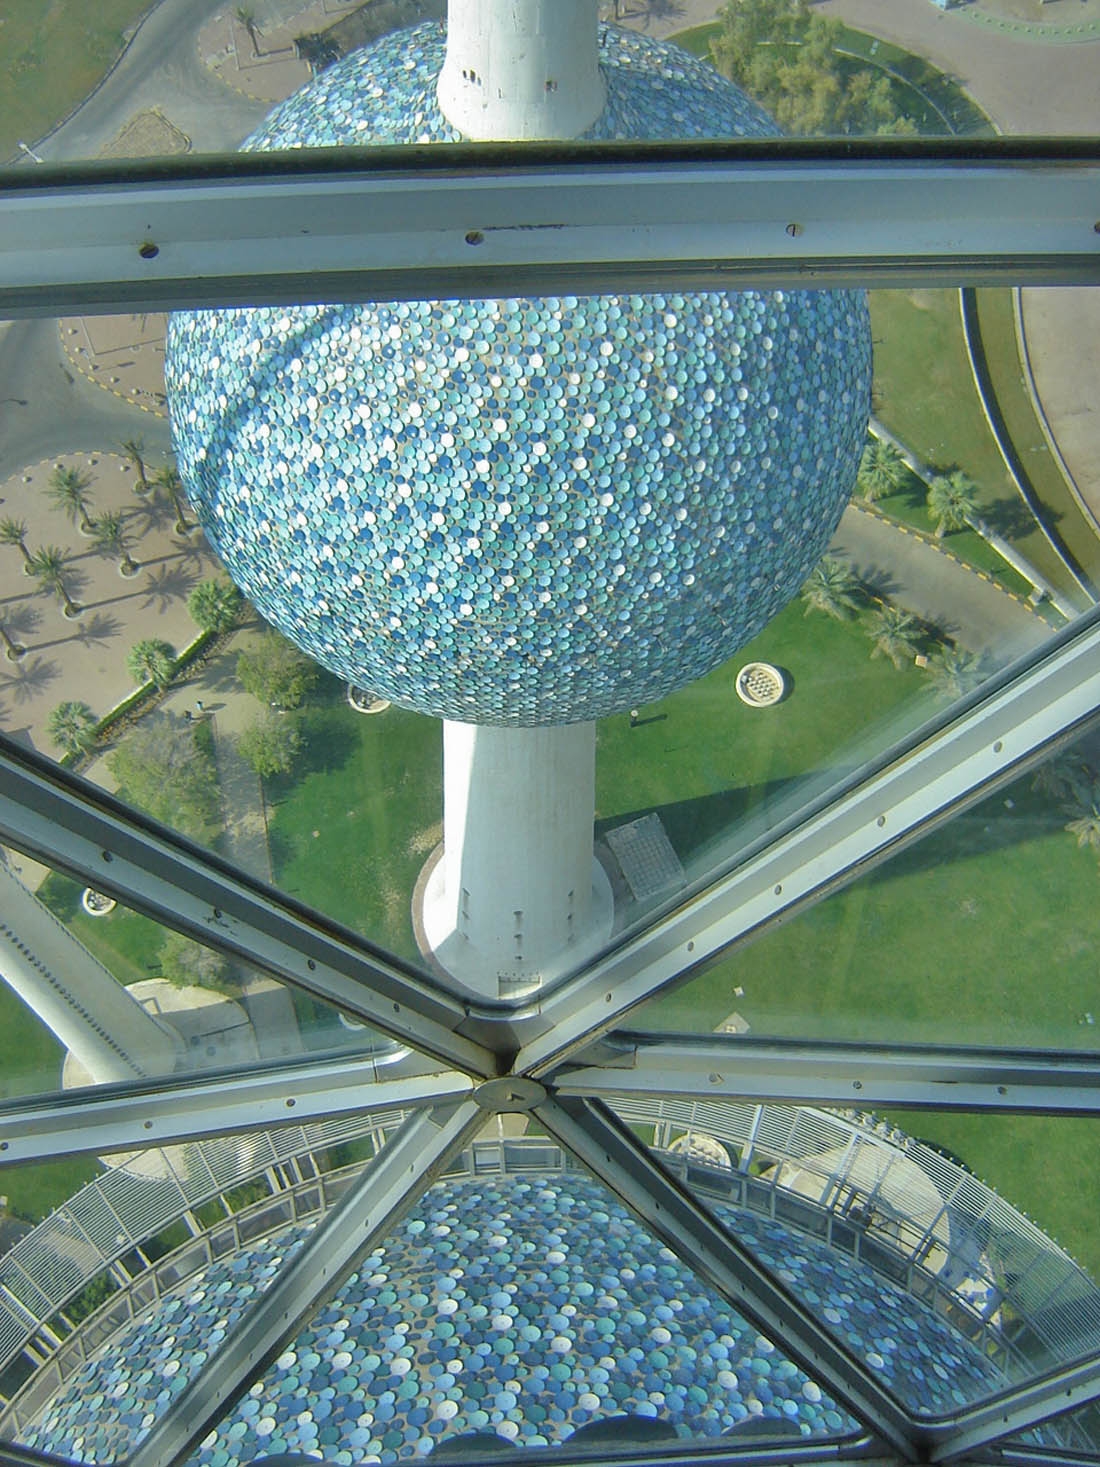 a large ball shaped structure seen from a window